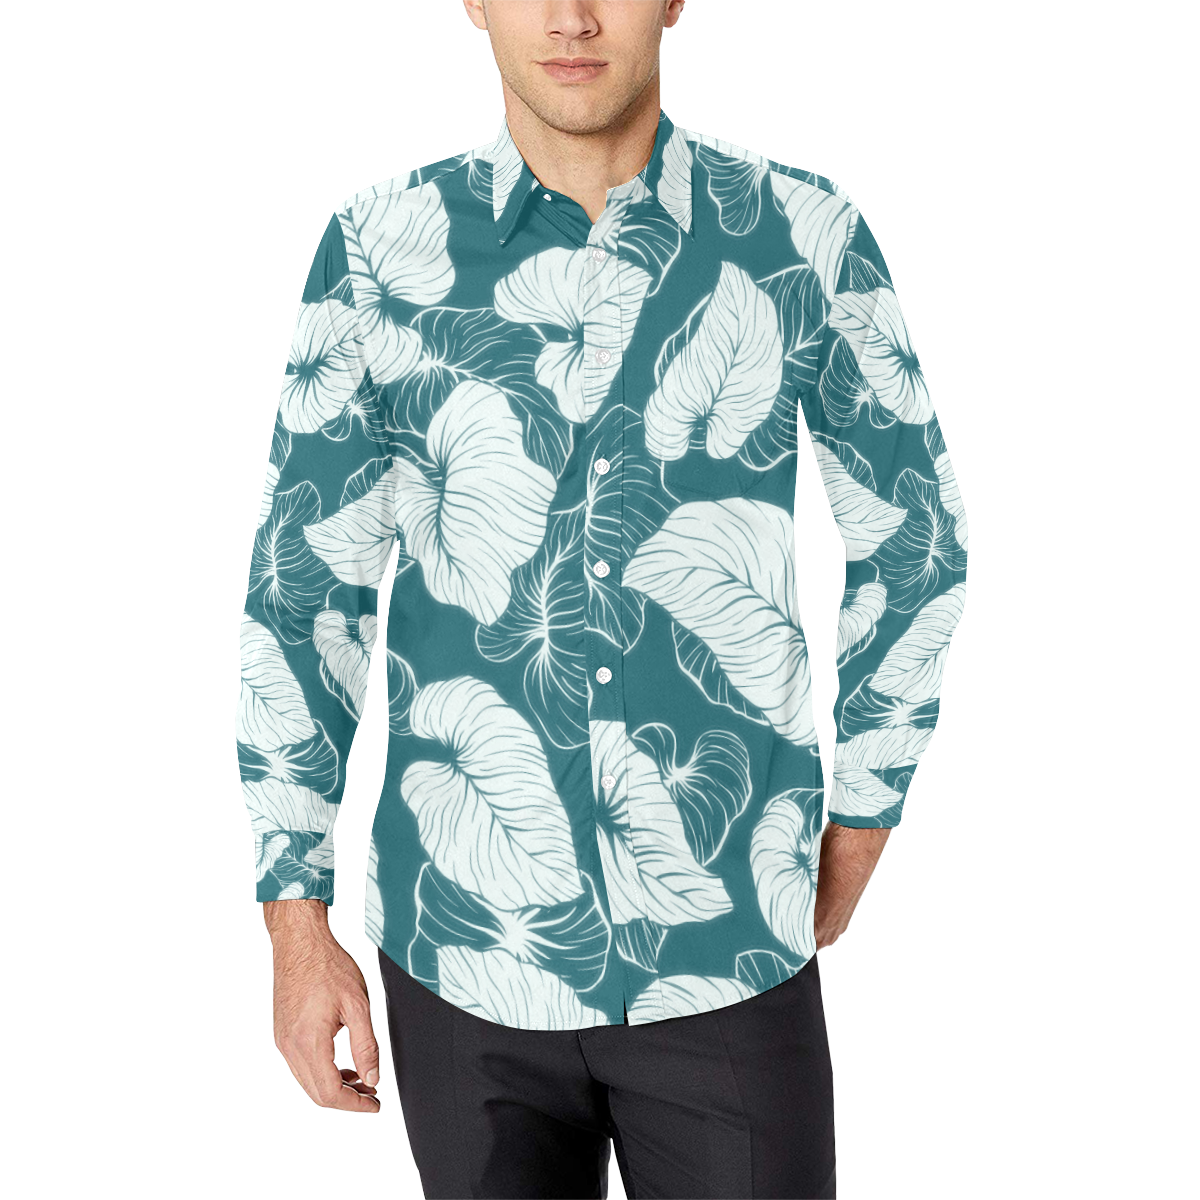 Dickie antique green palm leaves Men's All Over Print Casual Dress Shirt (Model T61)